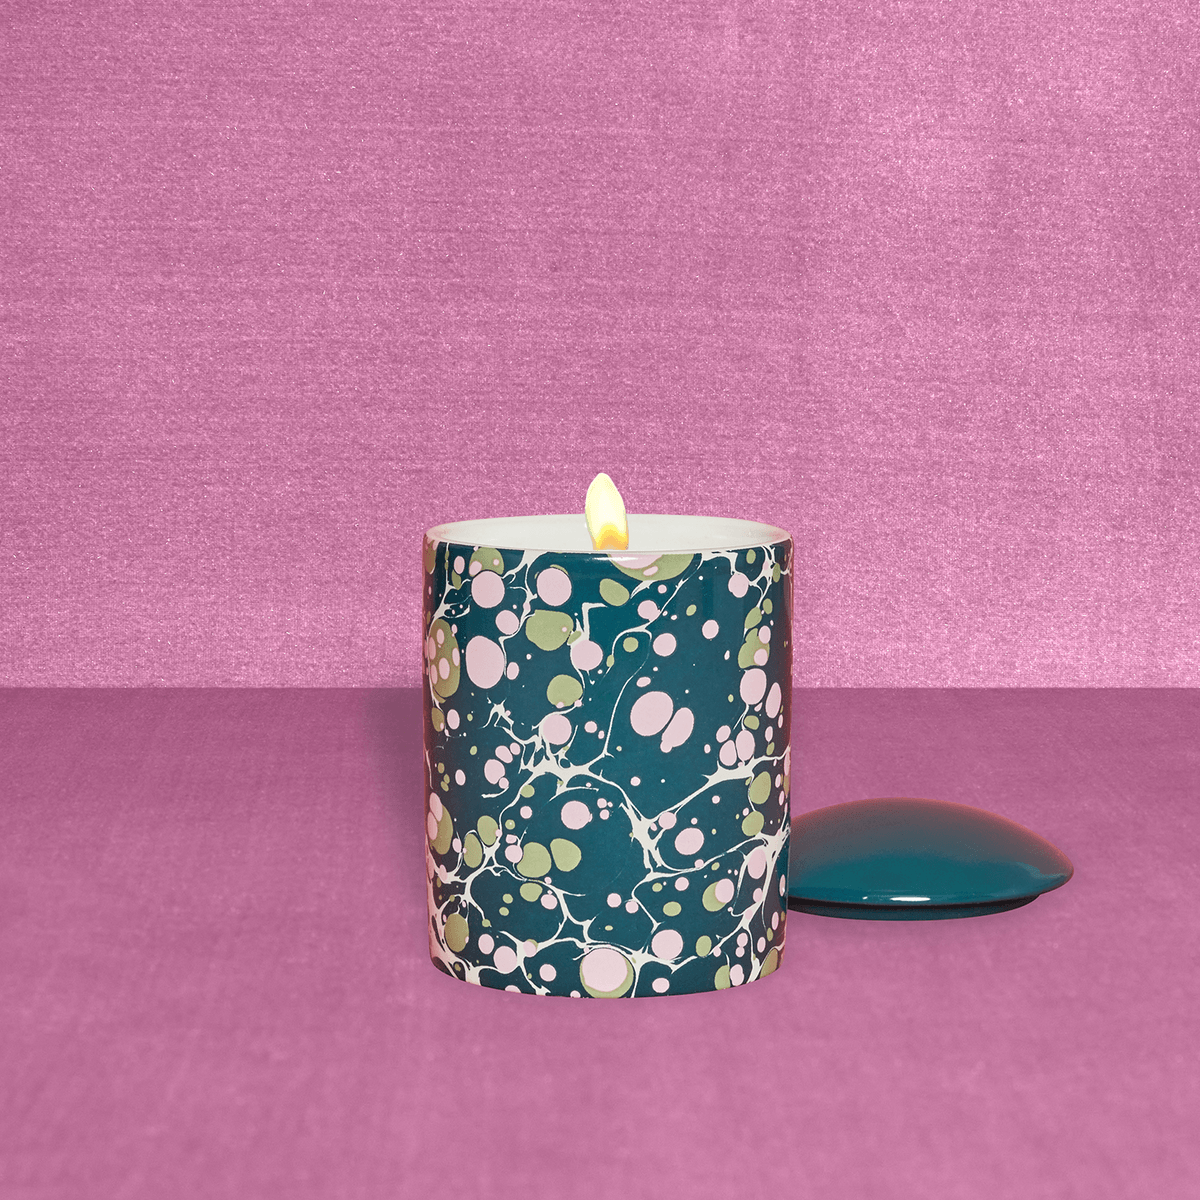 FRIDA No. 22 | CERAMIC CANDLE - CURATED BY MAVENS, LTD.